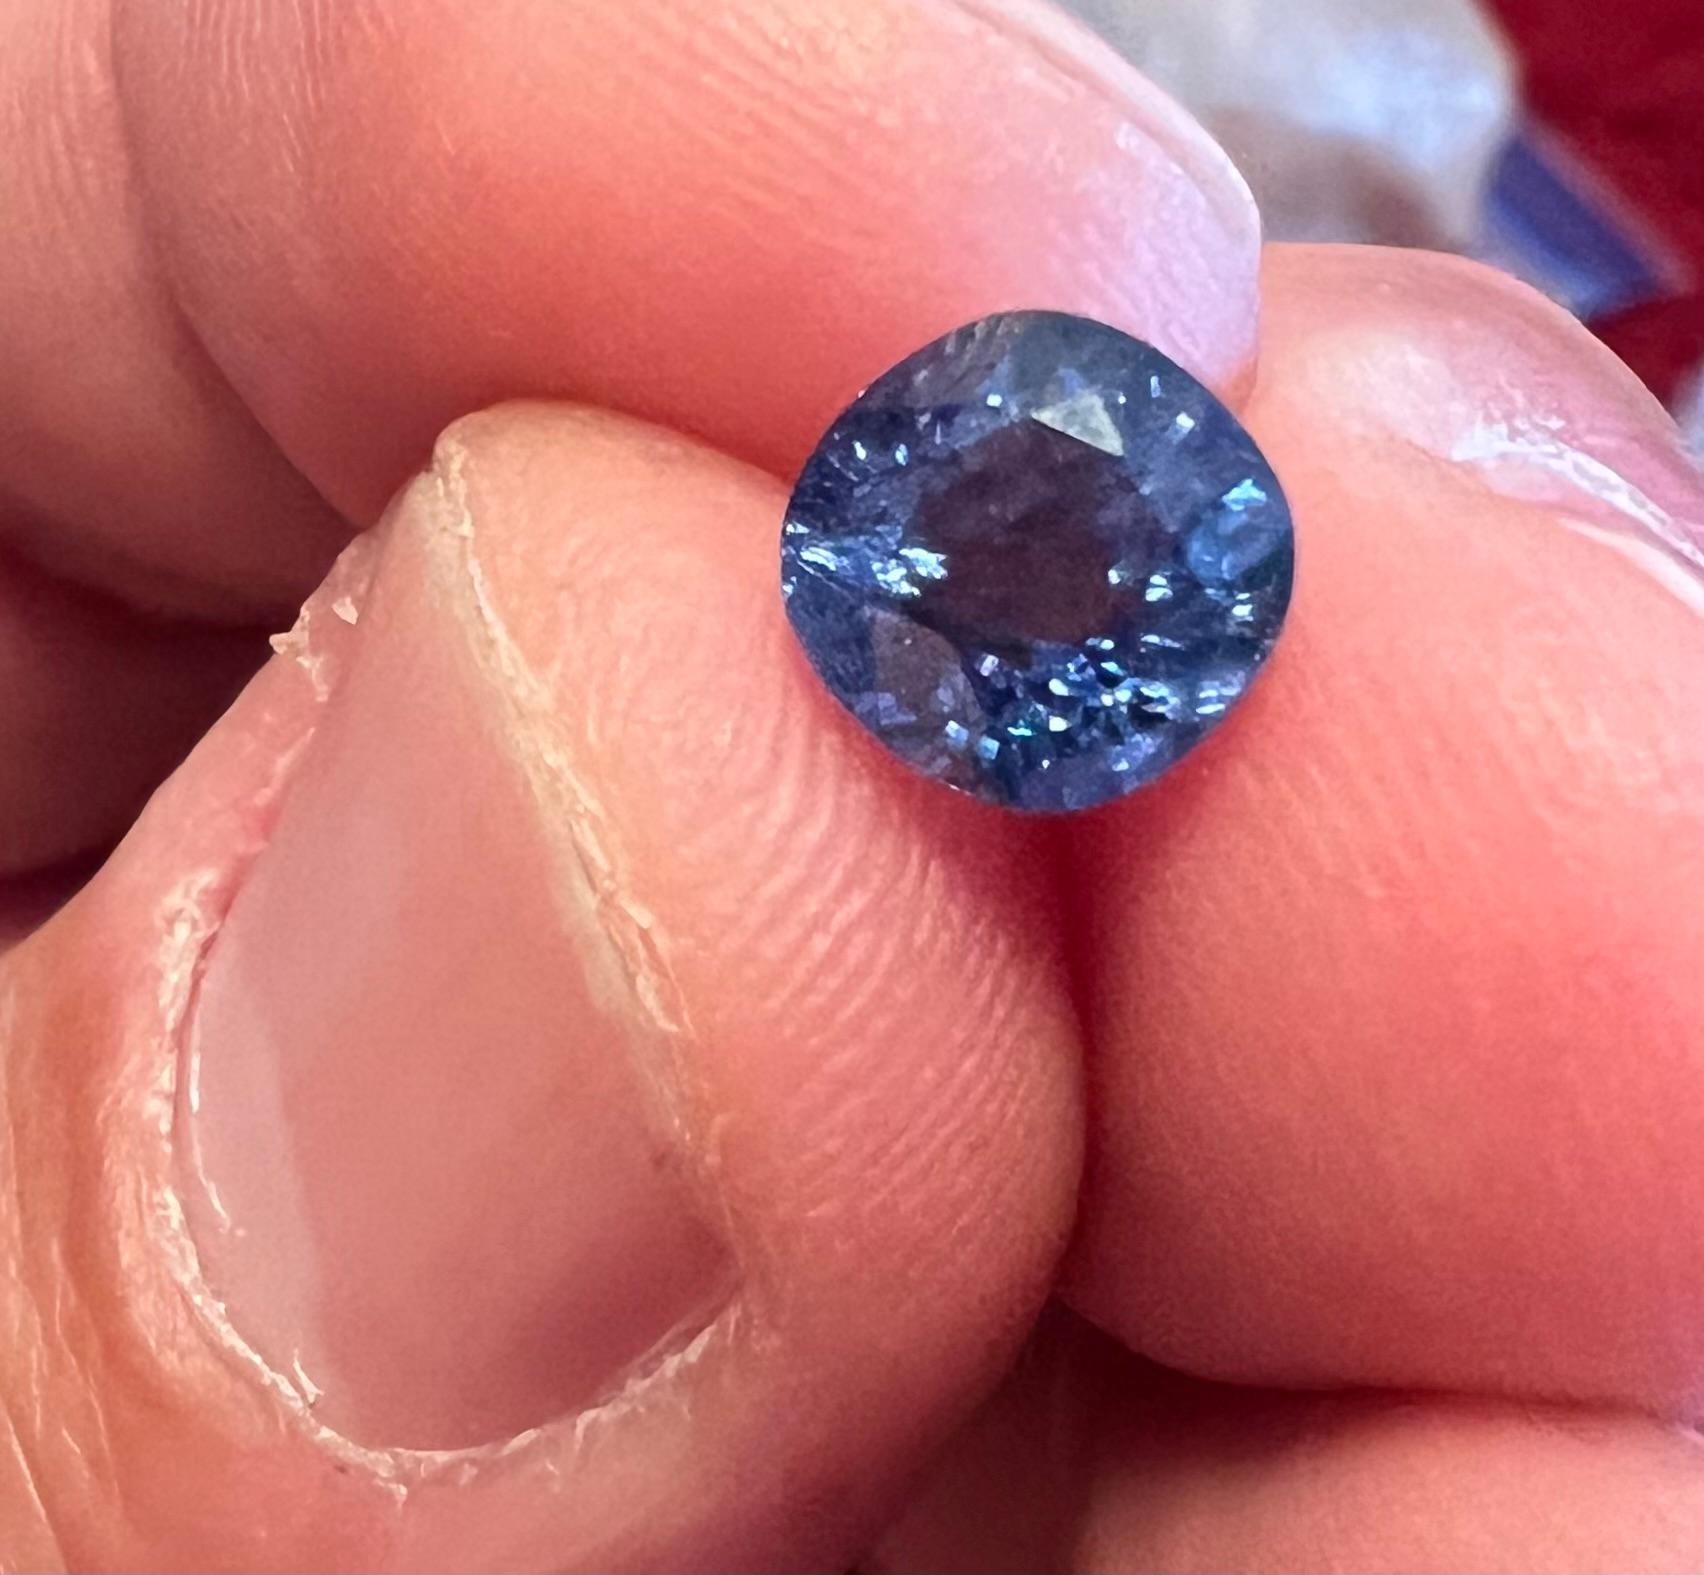 
This beautiful neon blue Cobalt Spinel is one of the rare beauties I was able to luckily obtain at the cobalt Spinel mine in Luc Yen Vietnam . It is exceptionally rare to obtain Cobalt Spinel anywhere in the world above a half a carat and this